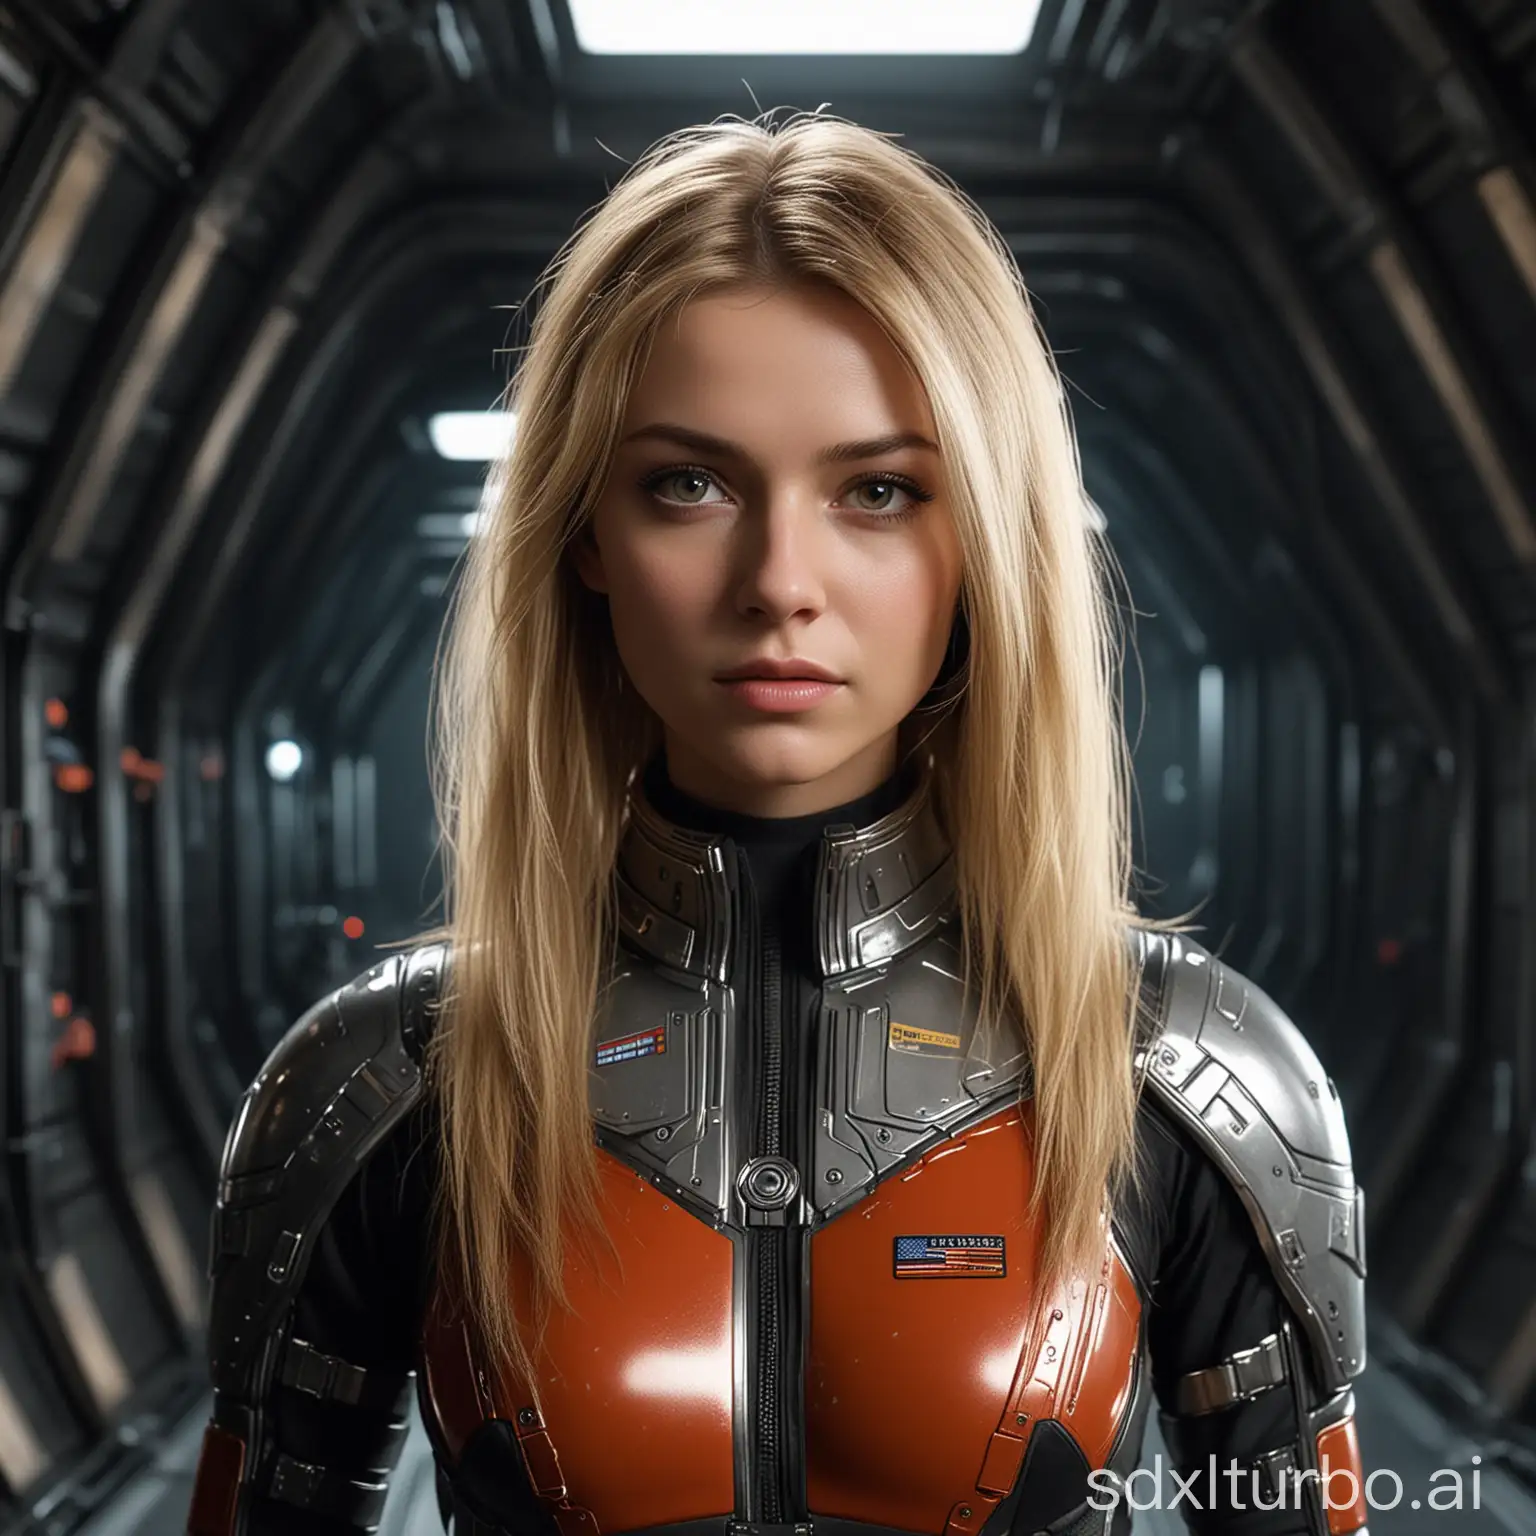 Stunning-Young-Woman-in-SciFi-Engineering-Suit-on-Battlestar-Galactica-Style-Spaceship-Interior